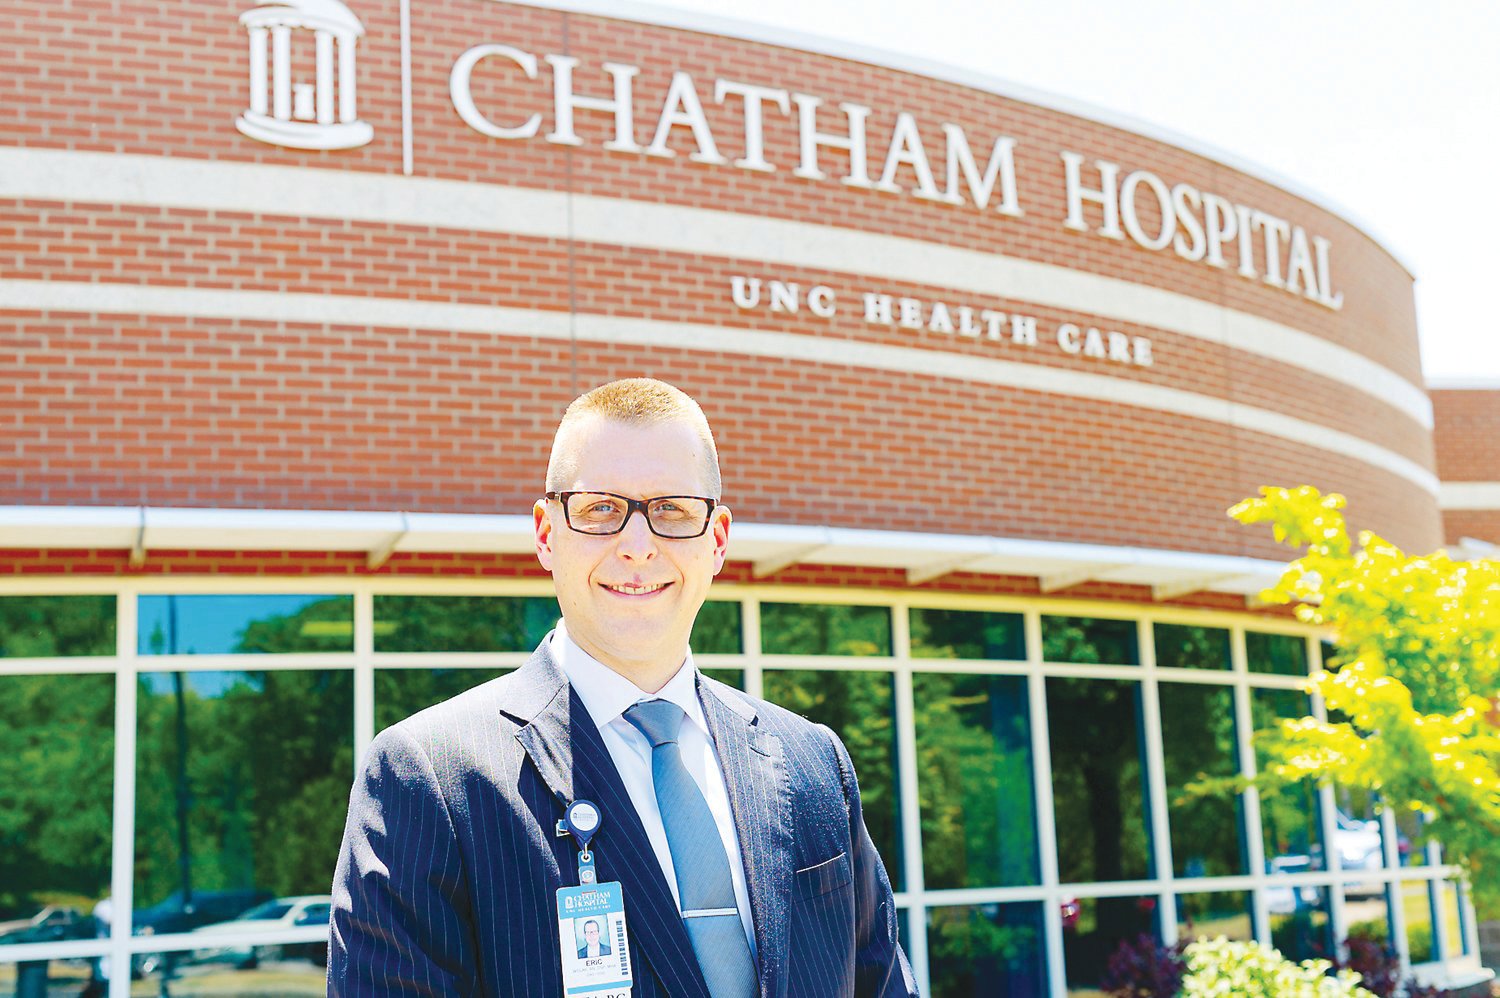 'It’s been very stressful for myself and for our leaders,' Erick Wolak said. 'We are doing everything we can to make sure we continue to provide great care here at Chatham Hospital and that patients have access to any bed that they need.'